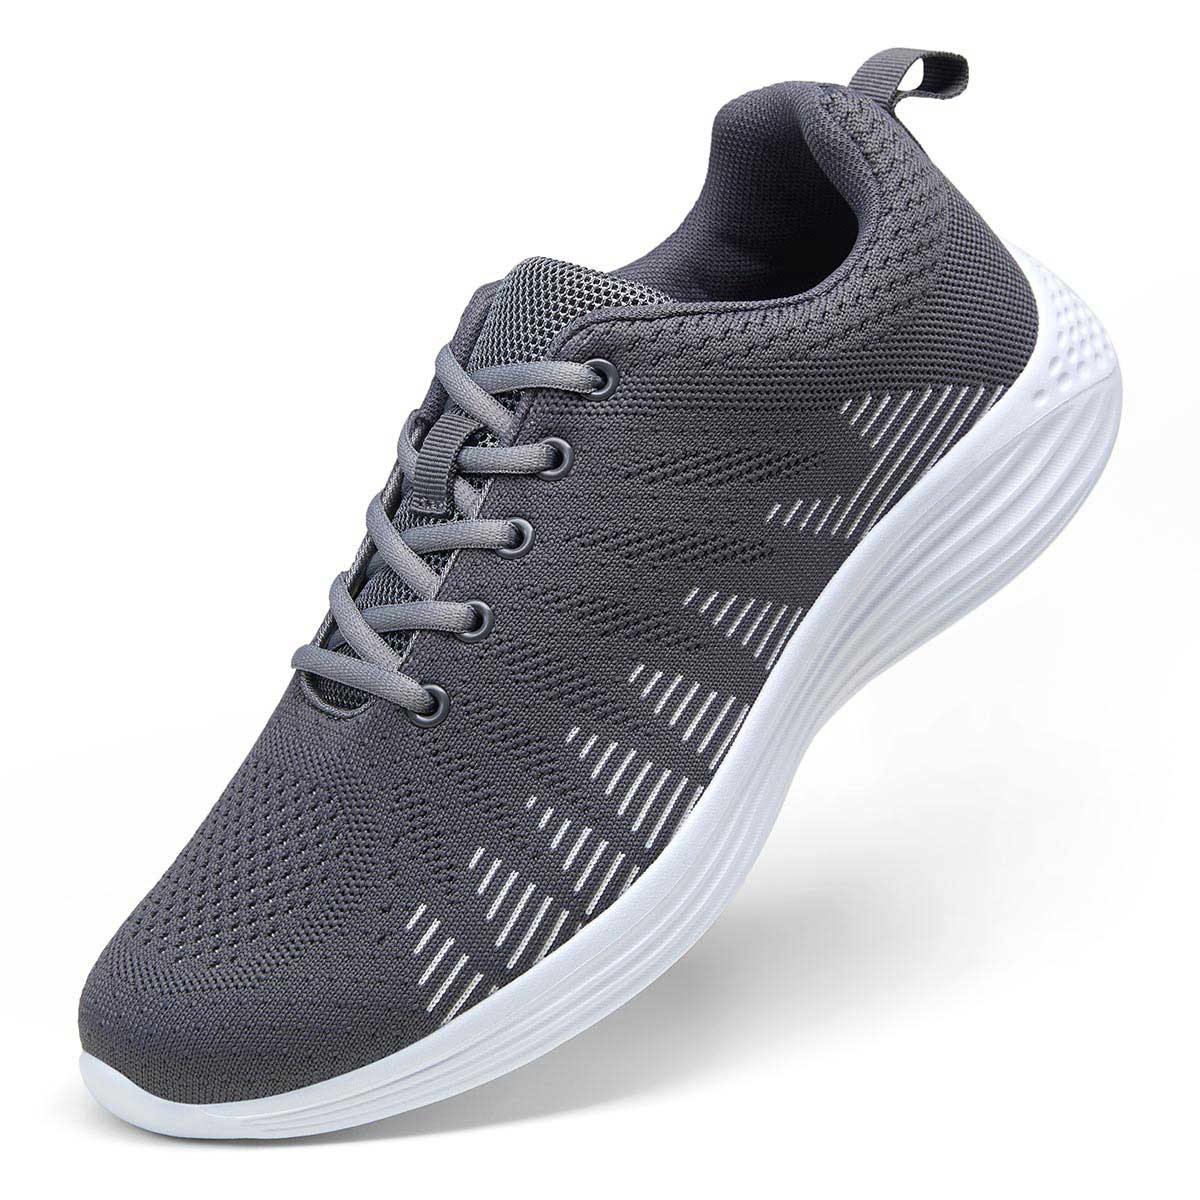 JOUSEN GREY KNITTED FABRIC RUNNING SHOES